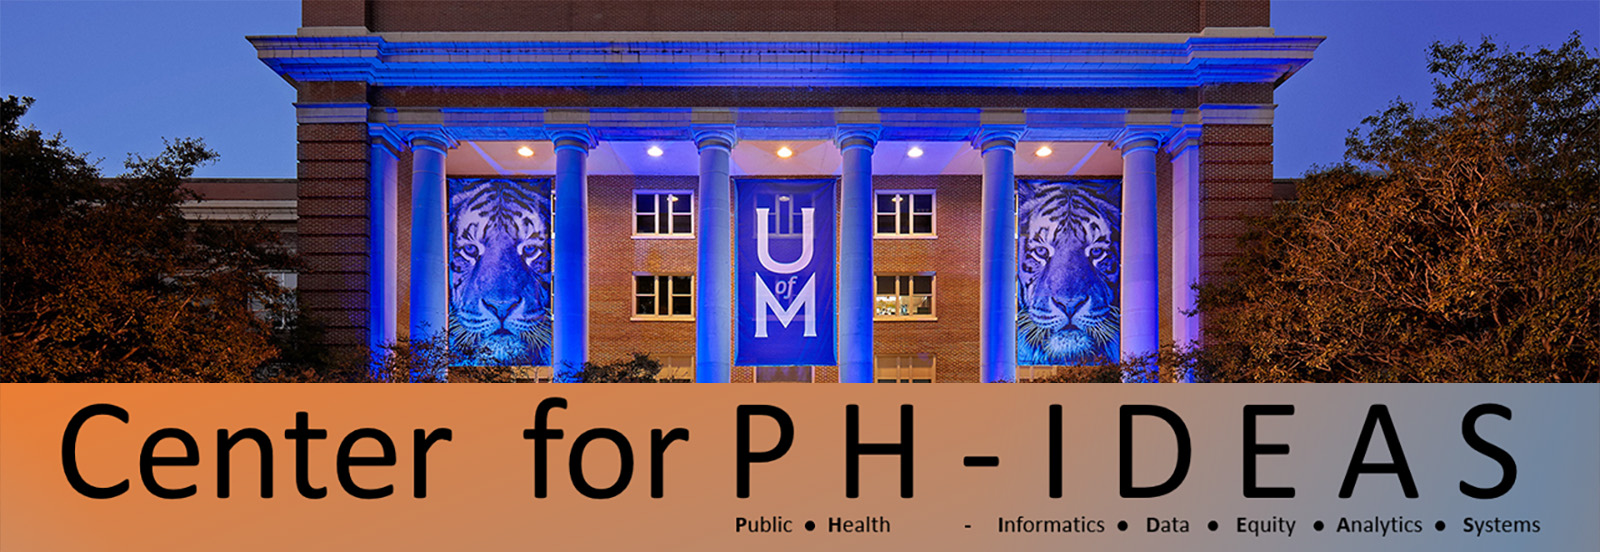 Title: Center for Public Health IDEAS (Public Health Informatics, Data, Equity, Analysis Systems)